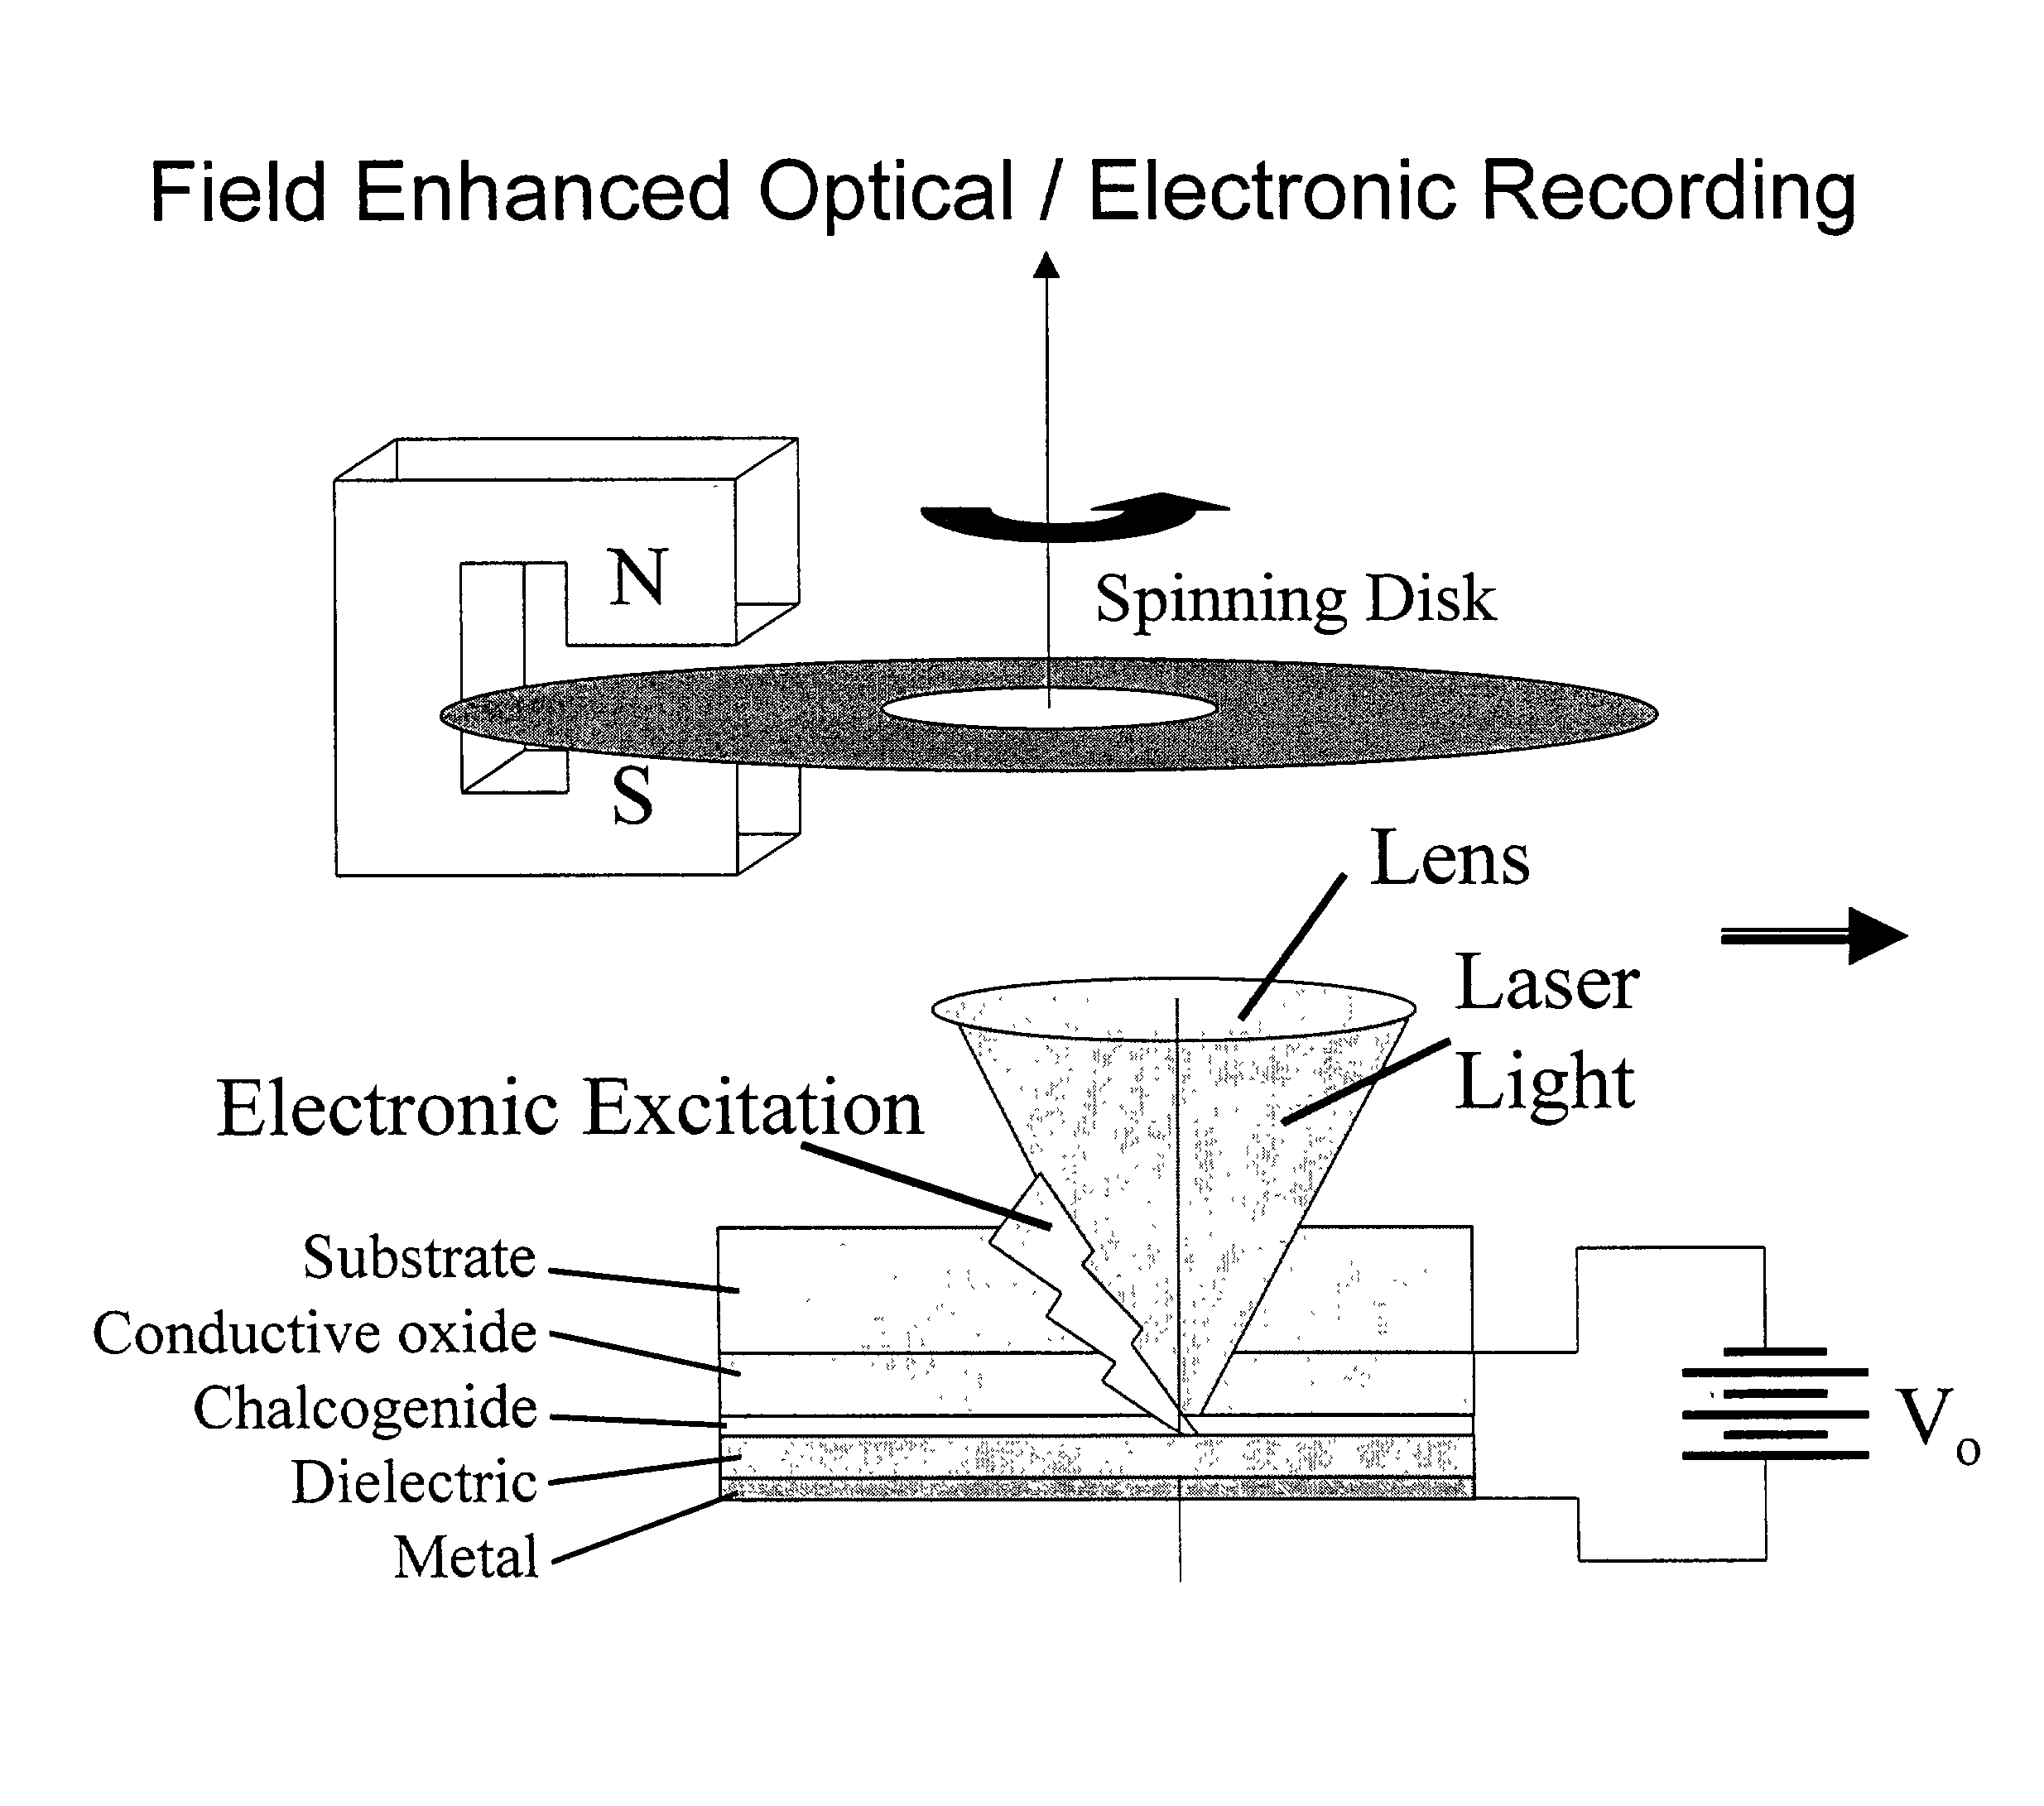 Increased data storage in optical data storage and retrieval systems using blue lasers and/or plasmon lenses